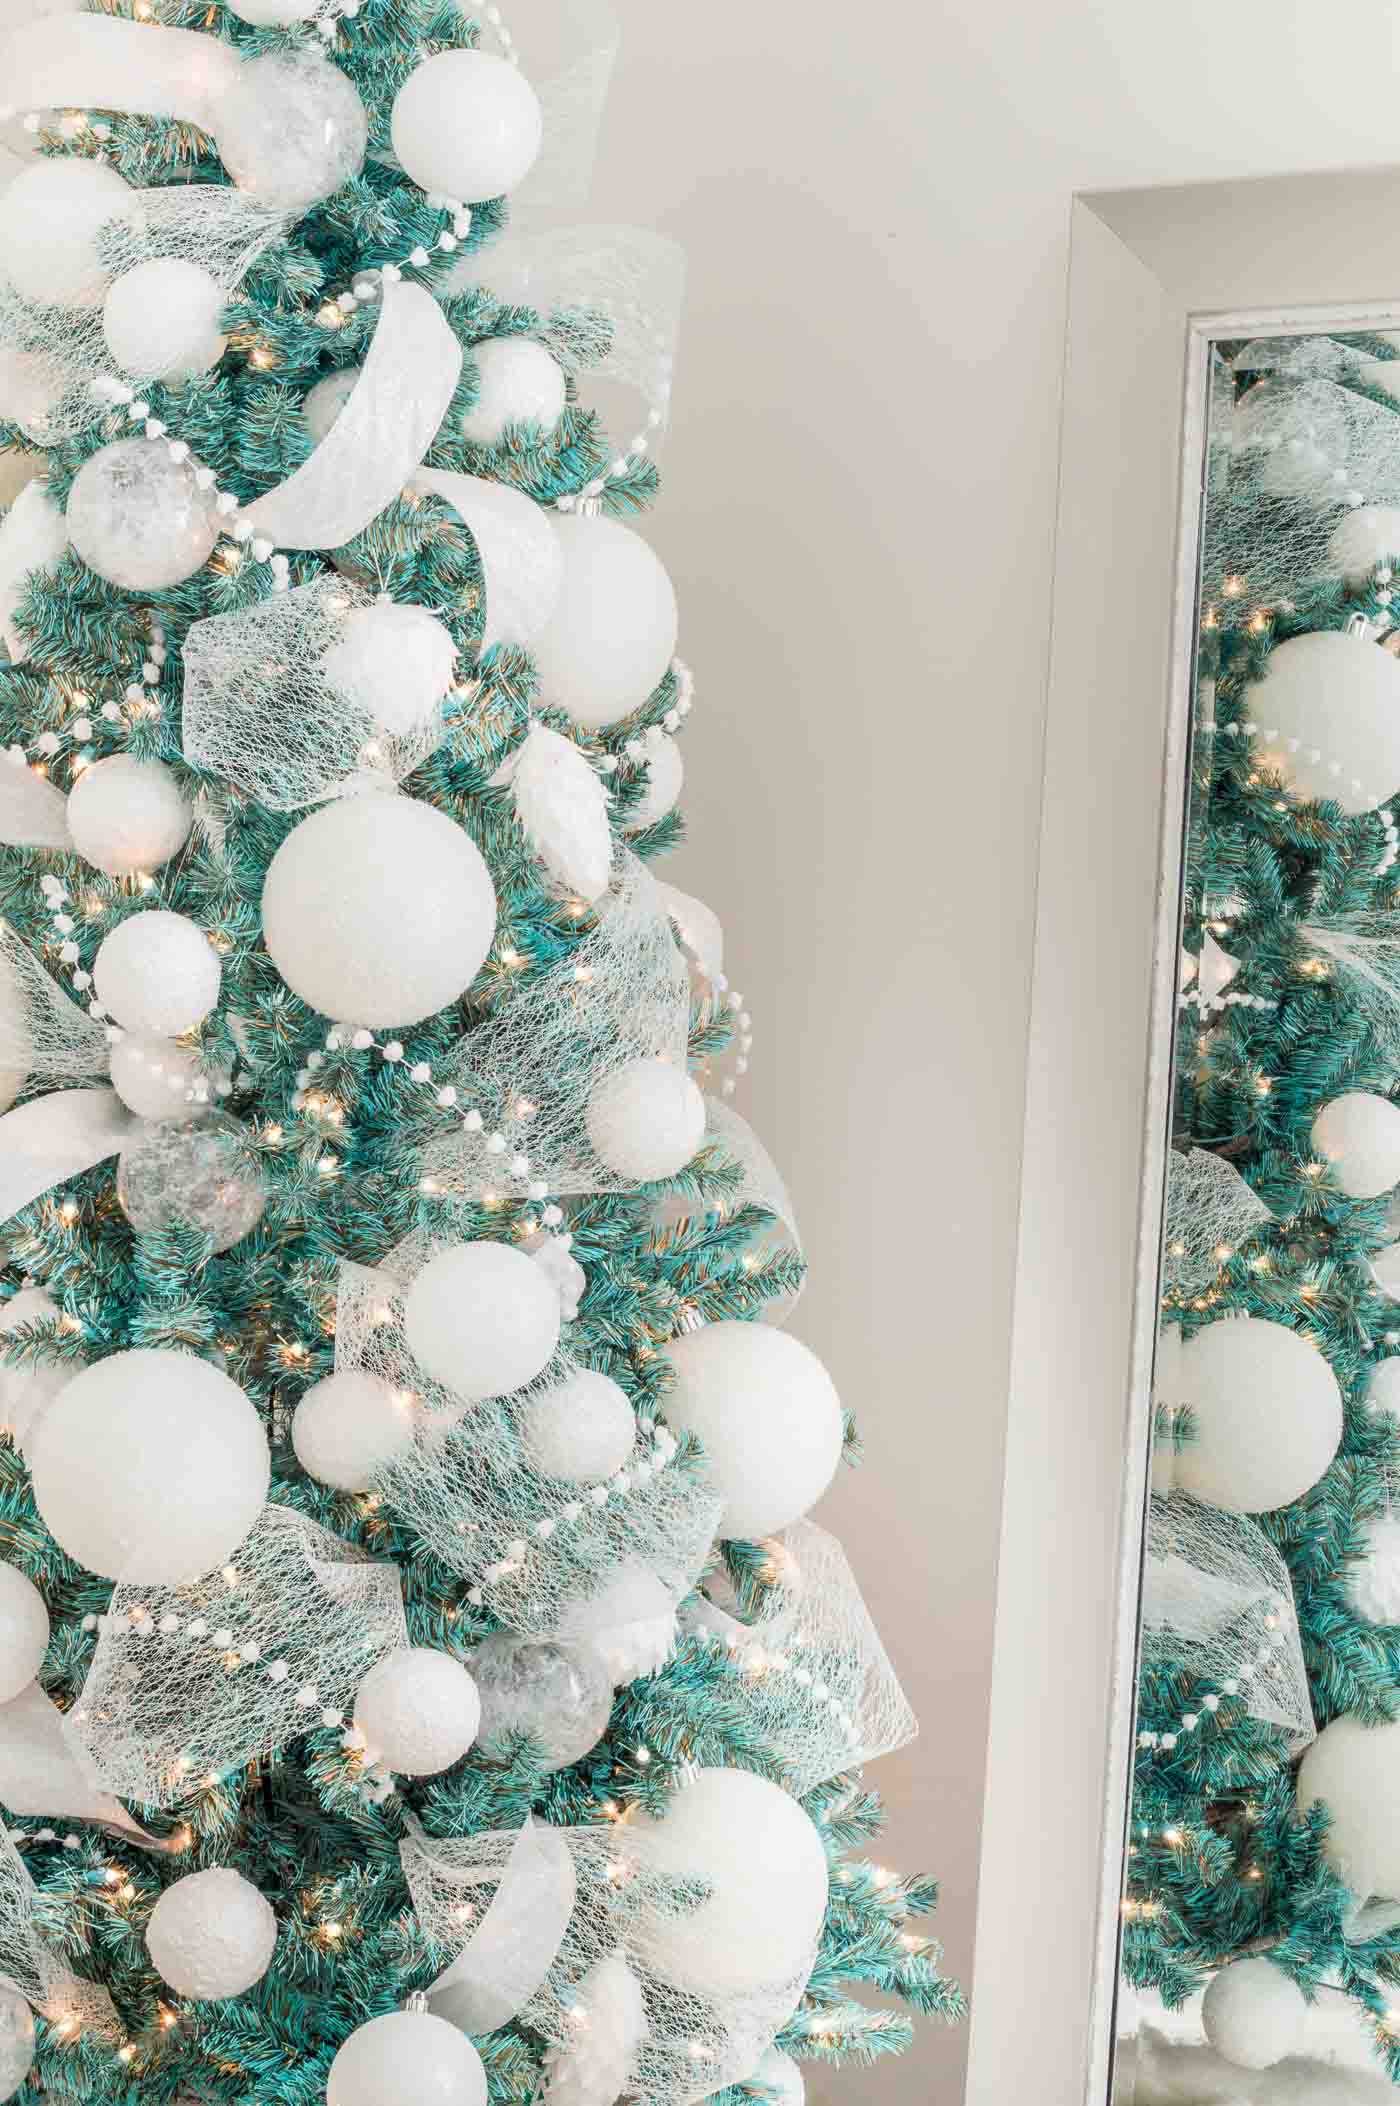 Tiffany Blue Christmas Tree Design with White Decor and Embellishments